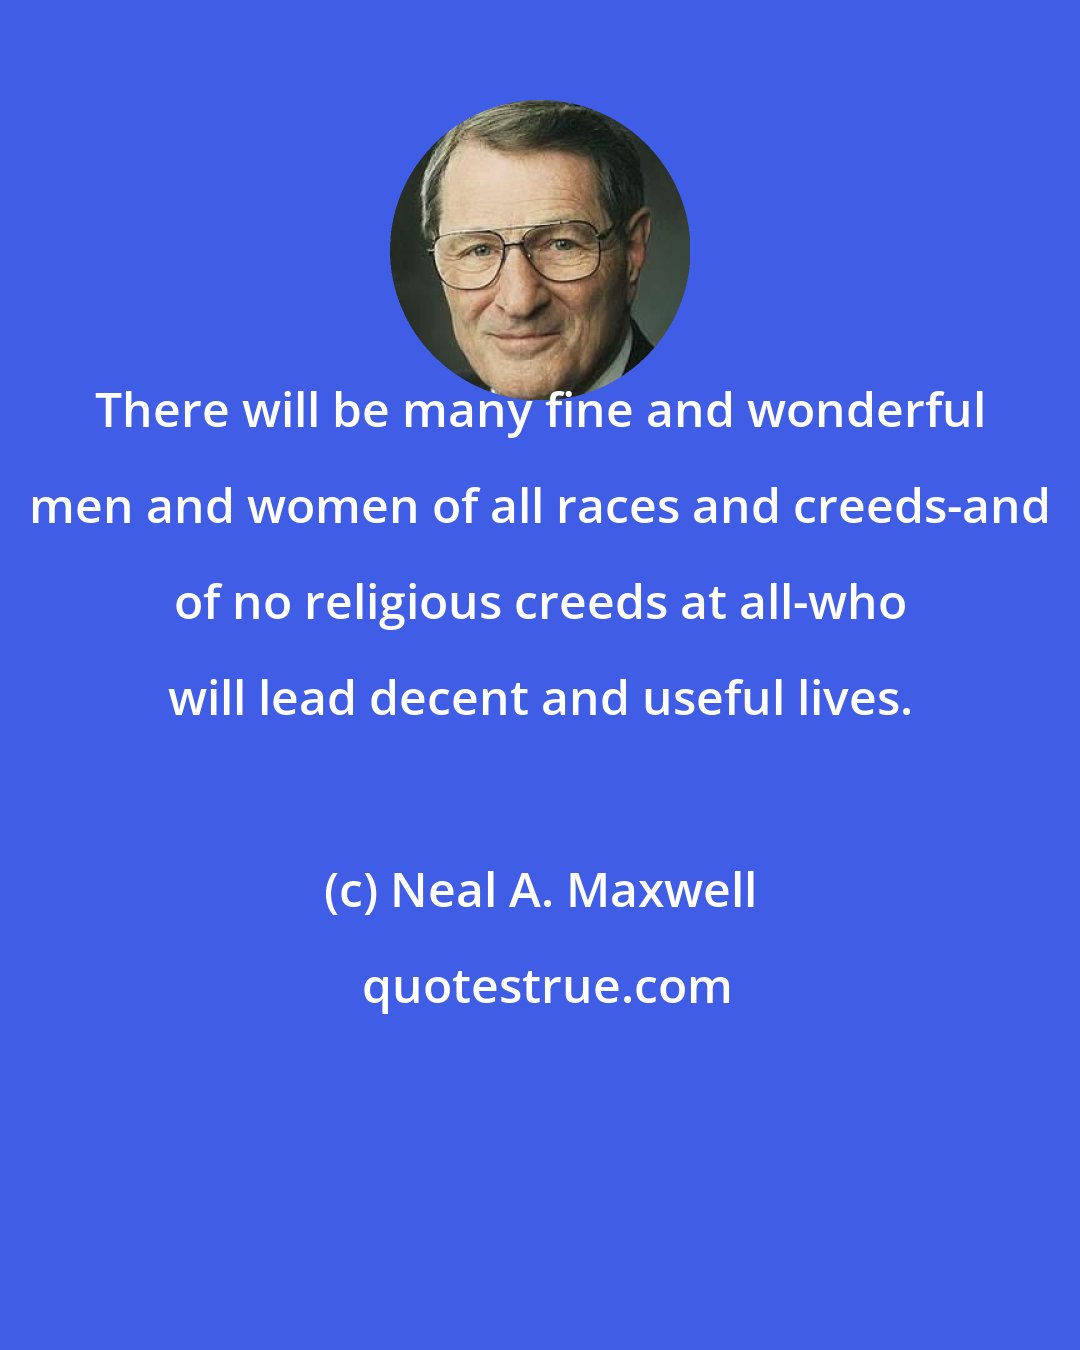 Neal A. Maxwell: There will be many fine and wonderful men and women of all races and creeds-and of no religious creeds at all-who will lead decent and useful lives.